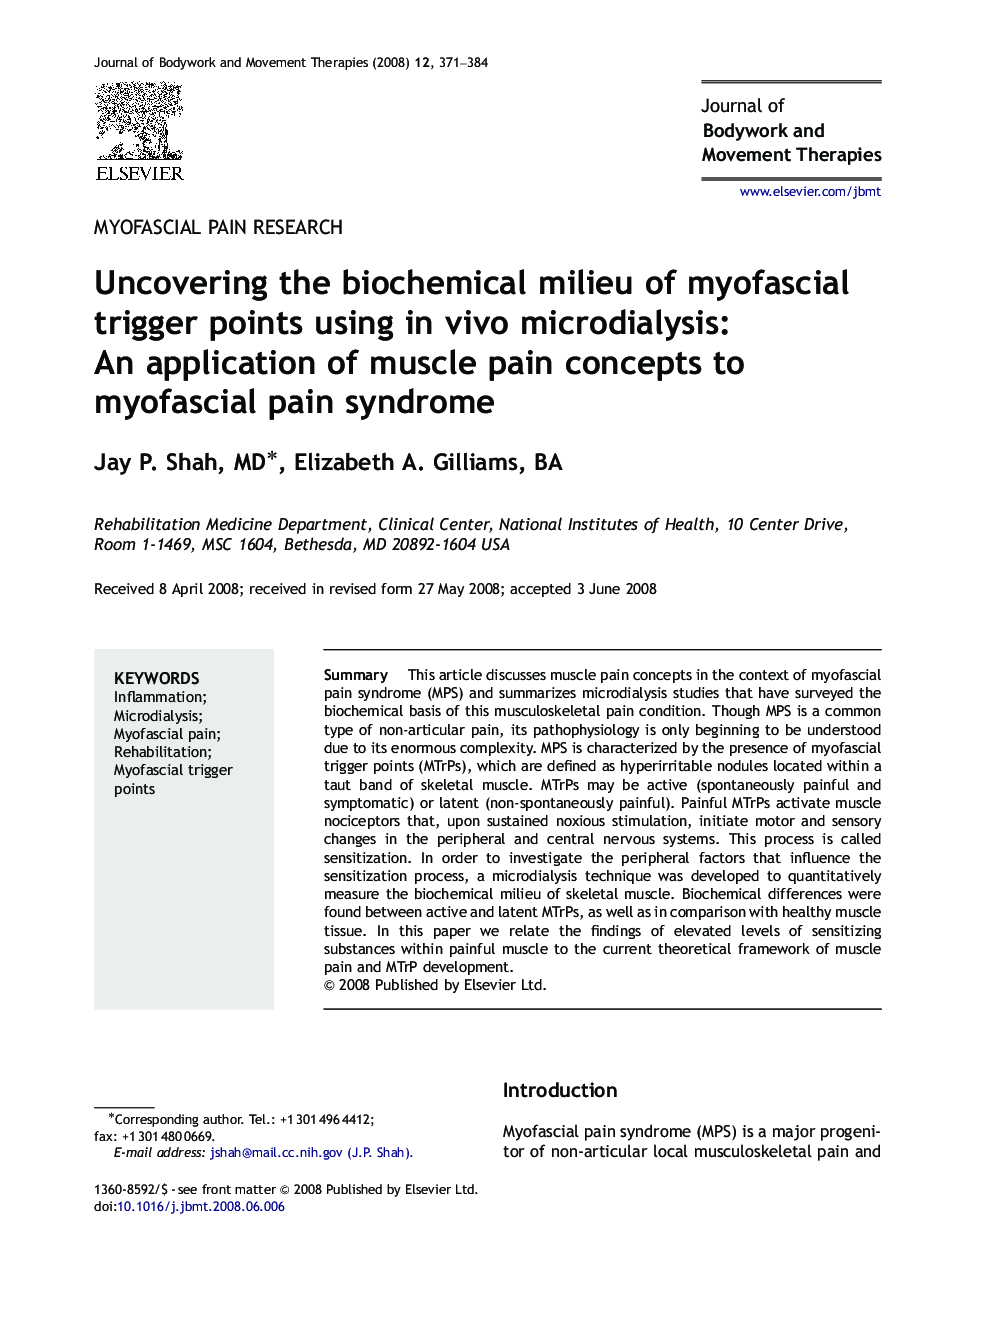 Uncovering the biochemical milieu of myofascial trigger points using in vivo microdialysis: An application of muscle pain concepts to myofascial pain syndrome